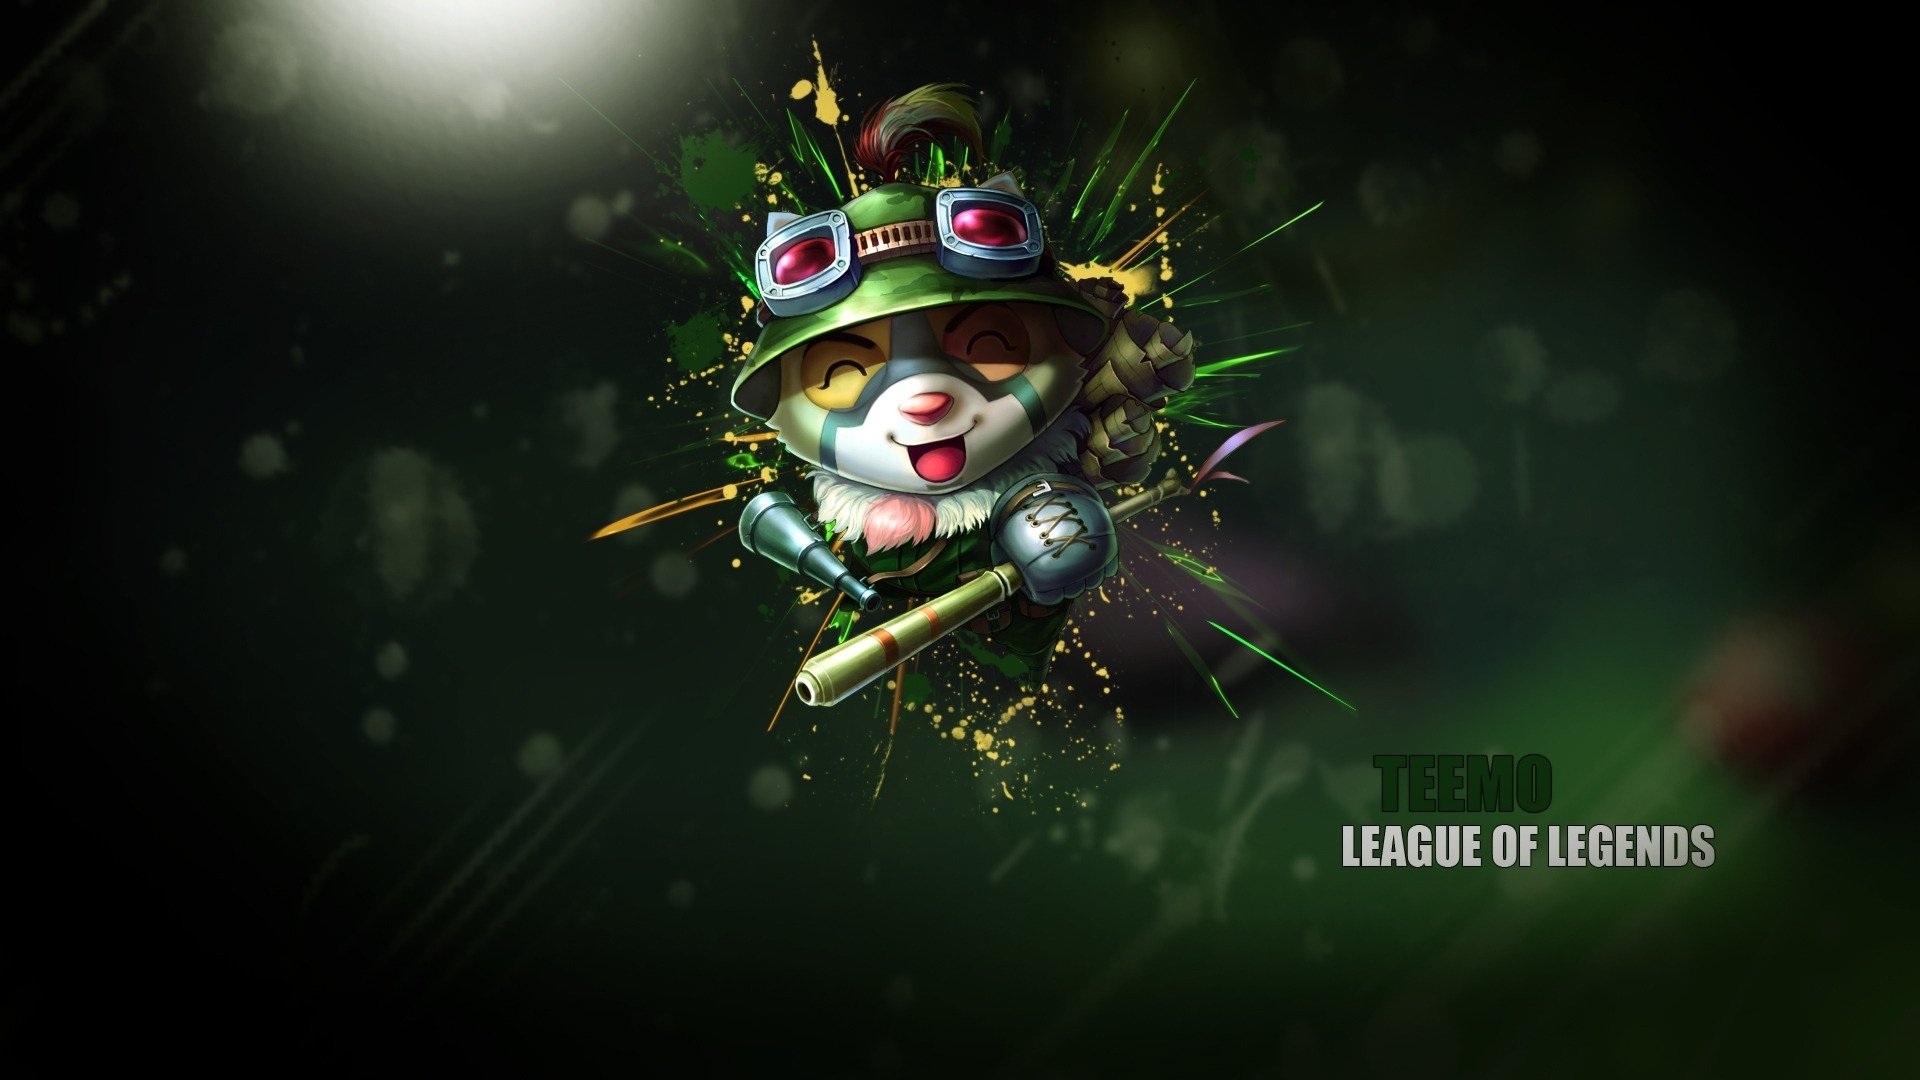 teemo wallpaper hd,fictional character,darkness,illustration,graphic design,animation